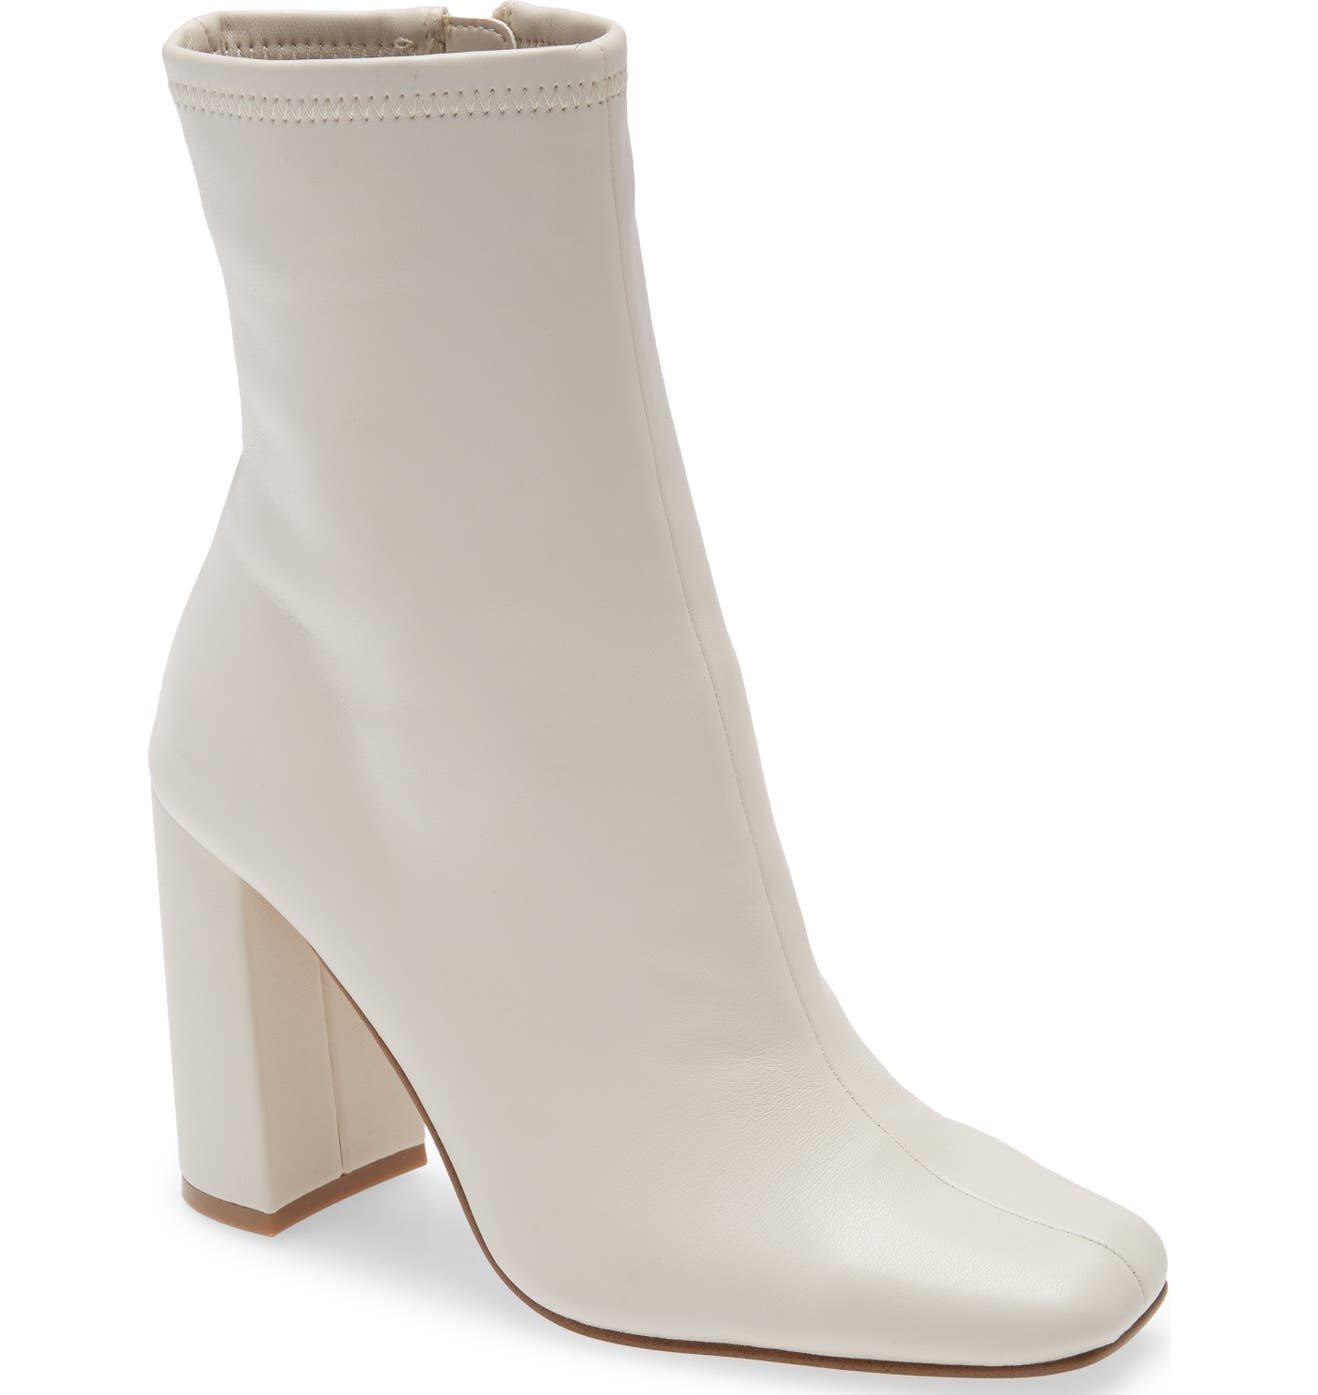 Add a extra height to your feminine maxi dress look with Steve Madden's Lynden boot